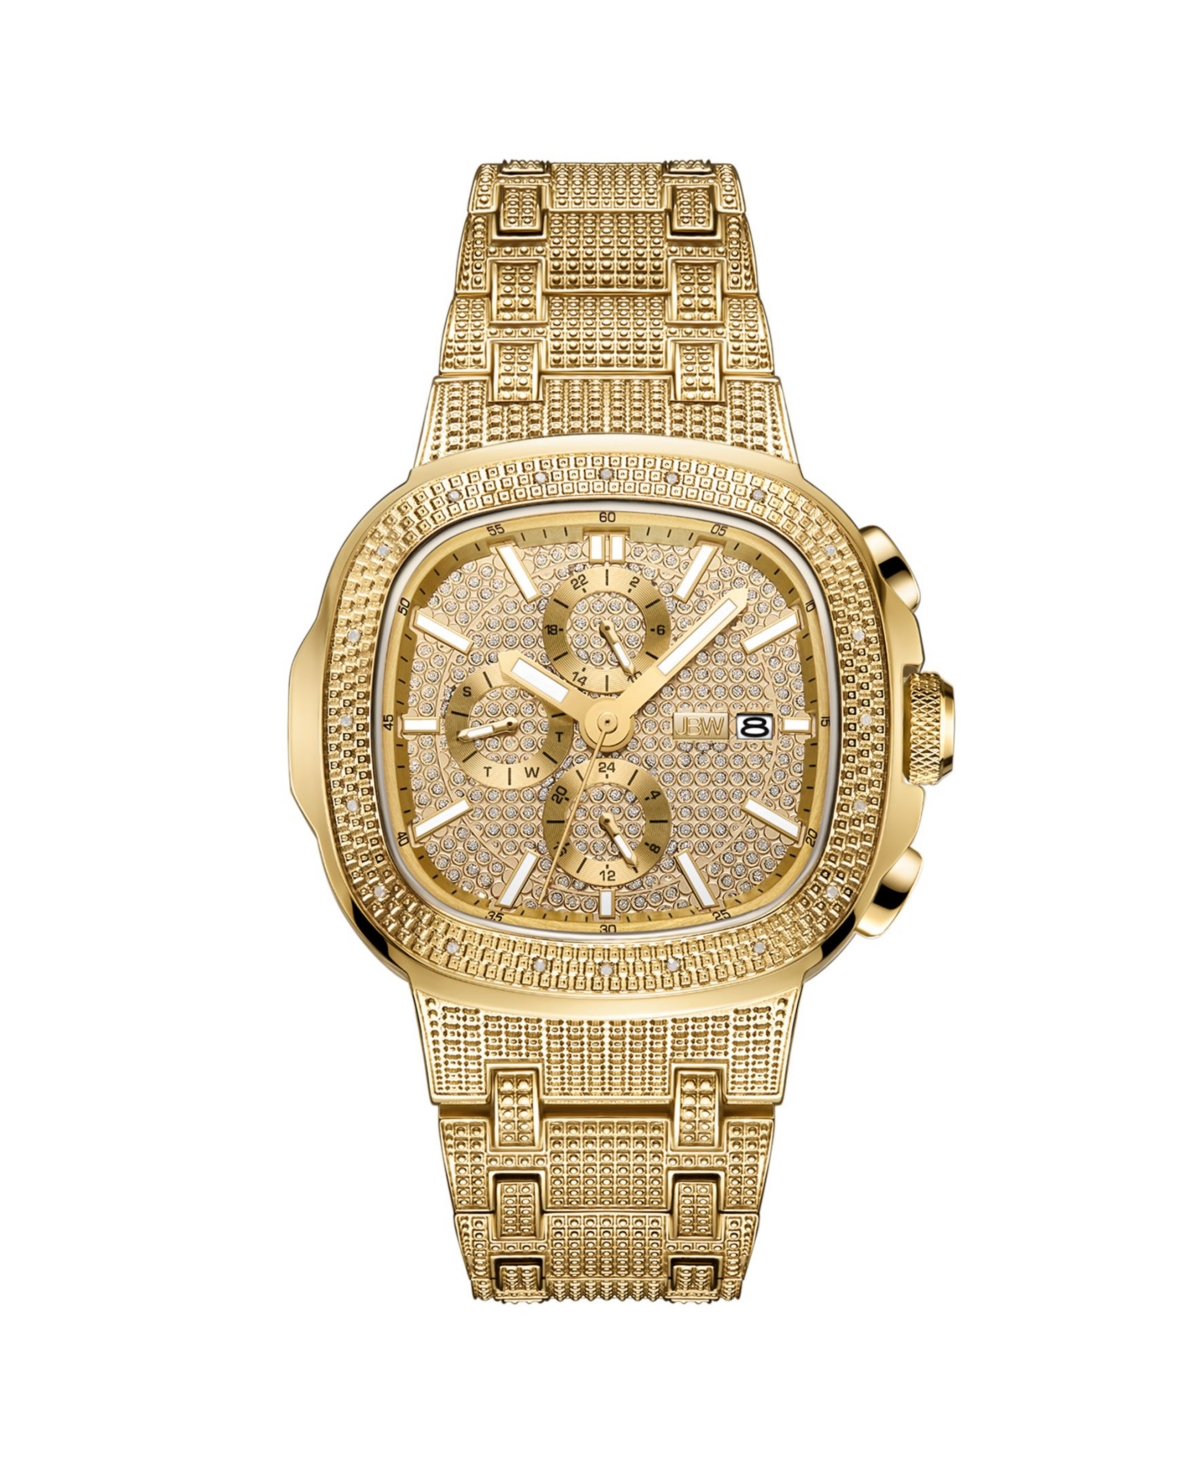 Men's Diamond (1/5 ct. t.w.) Watch in 18k Gold-plated Stainless-steel Watch 48mm - Gold